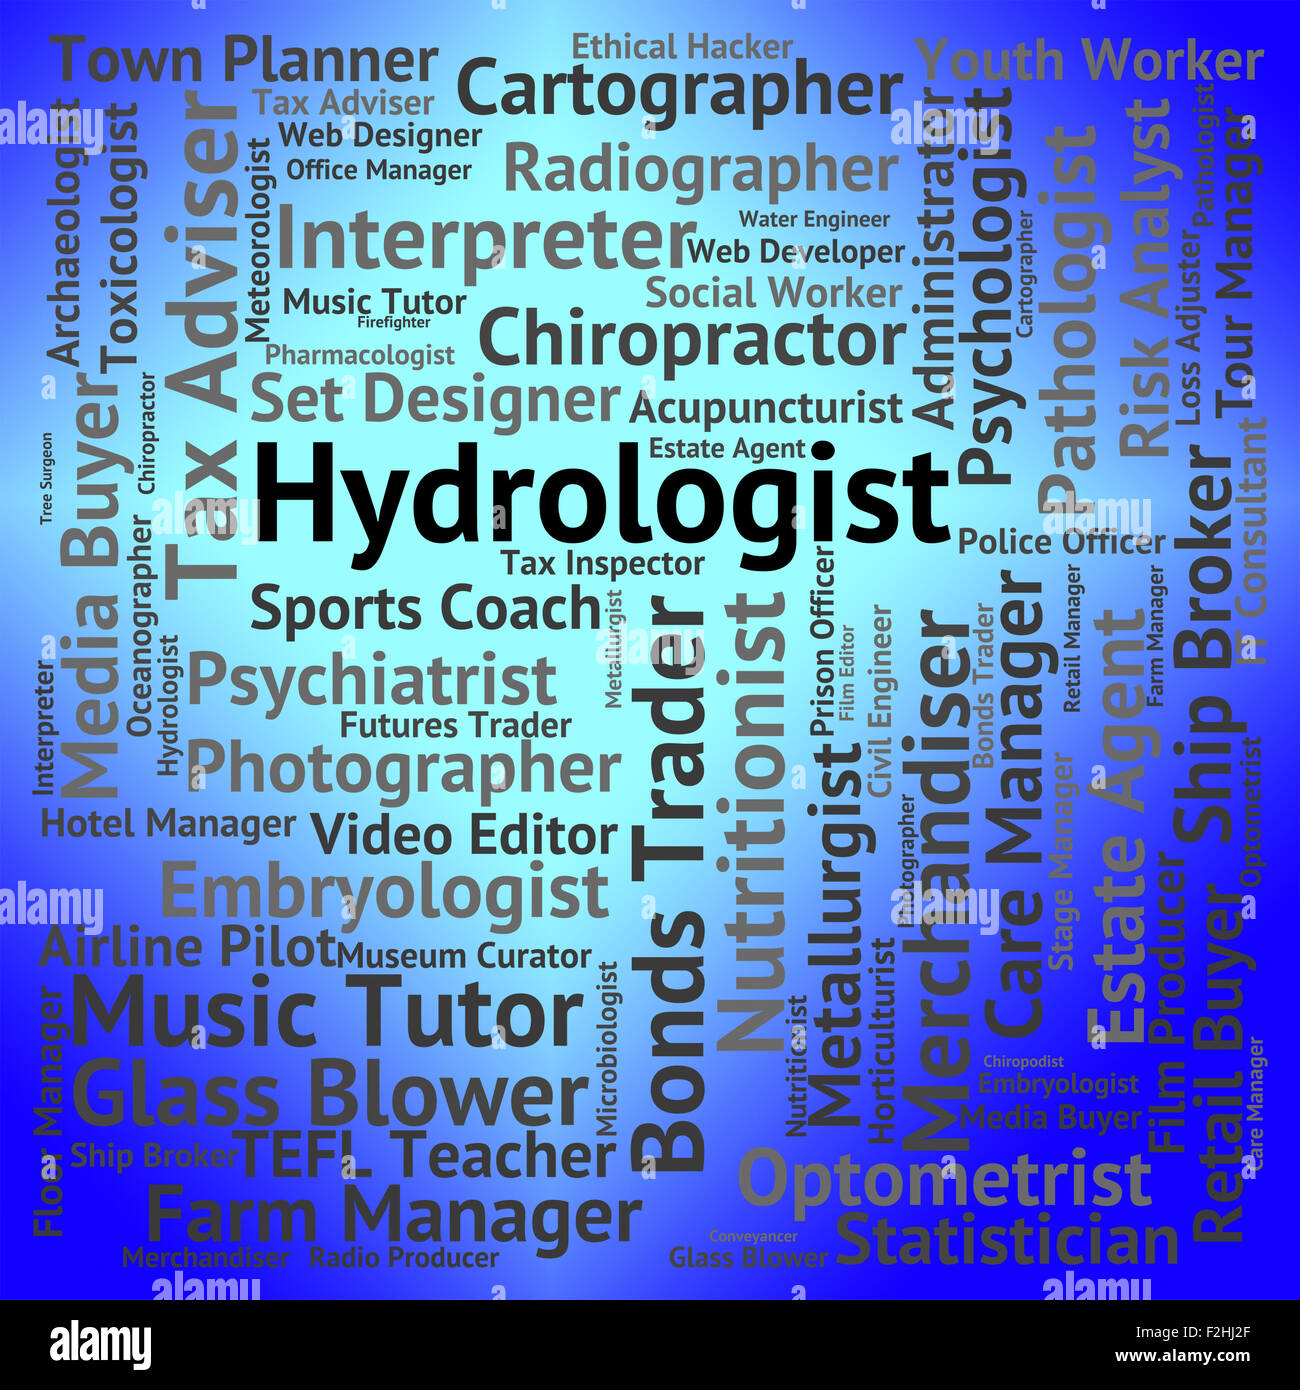 Hydrologist Job Meaning Hydraulics Expert And Words Stock Photo